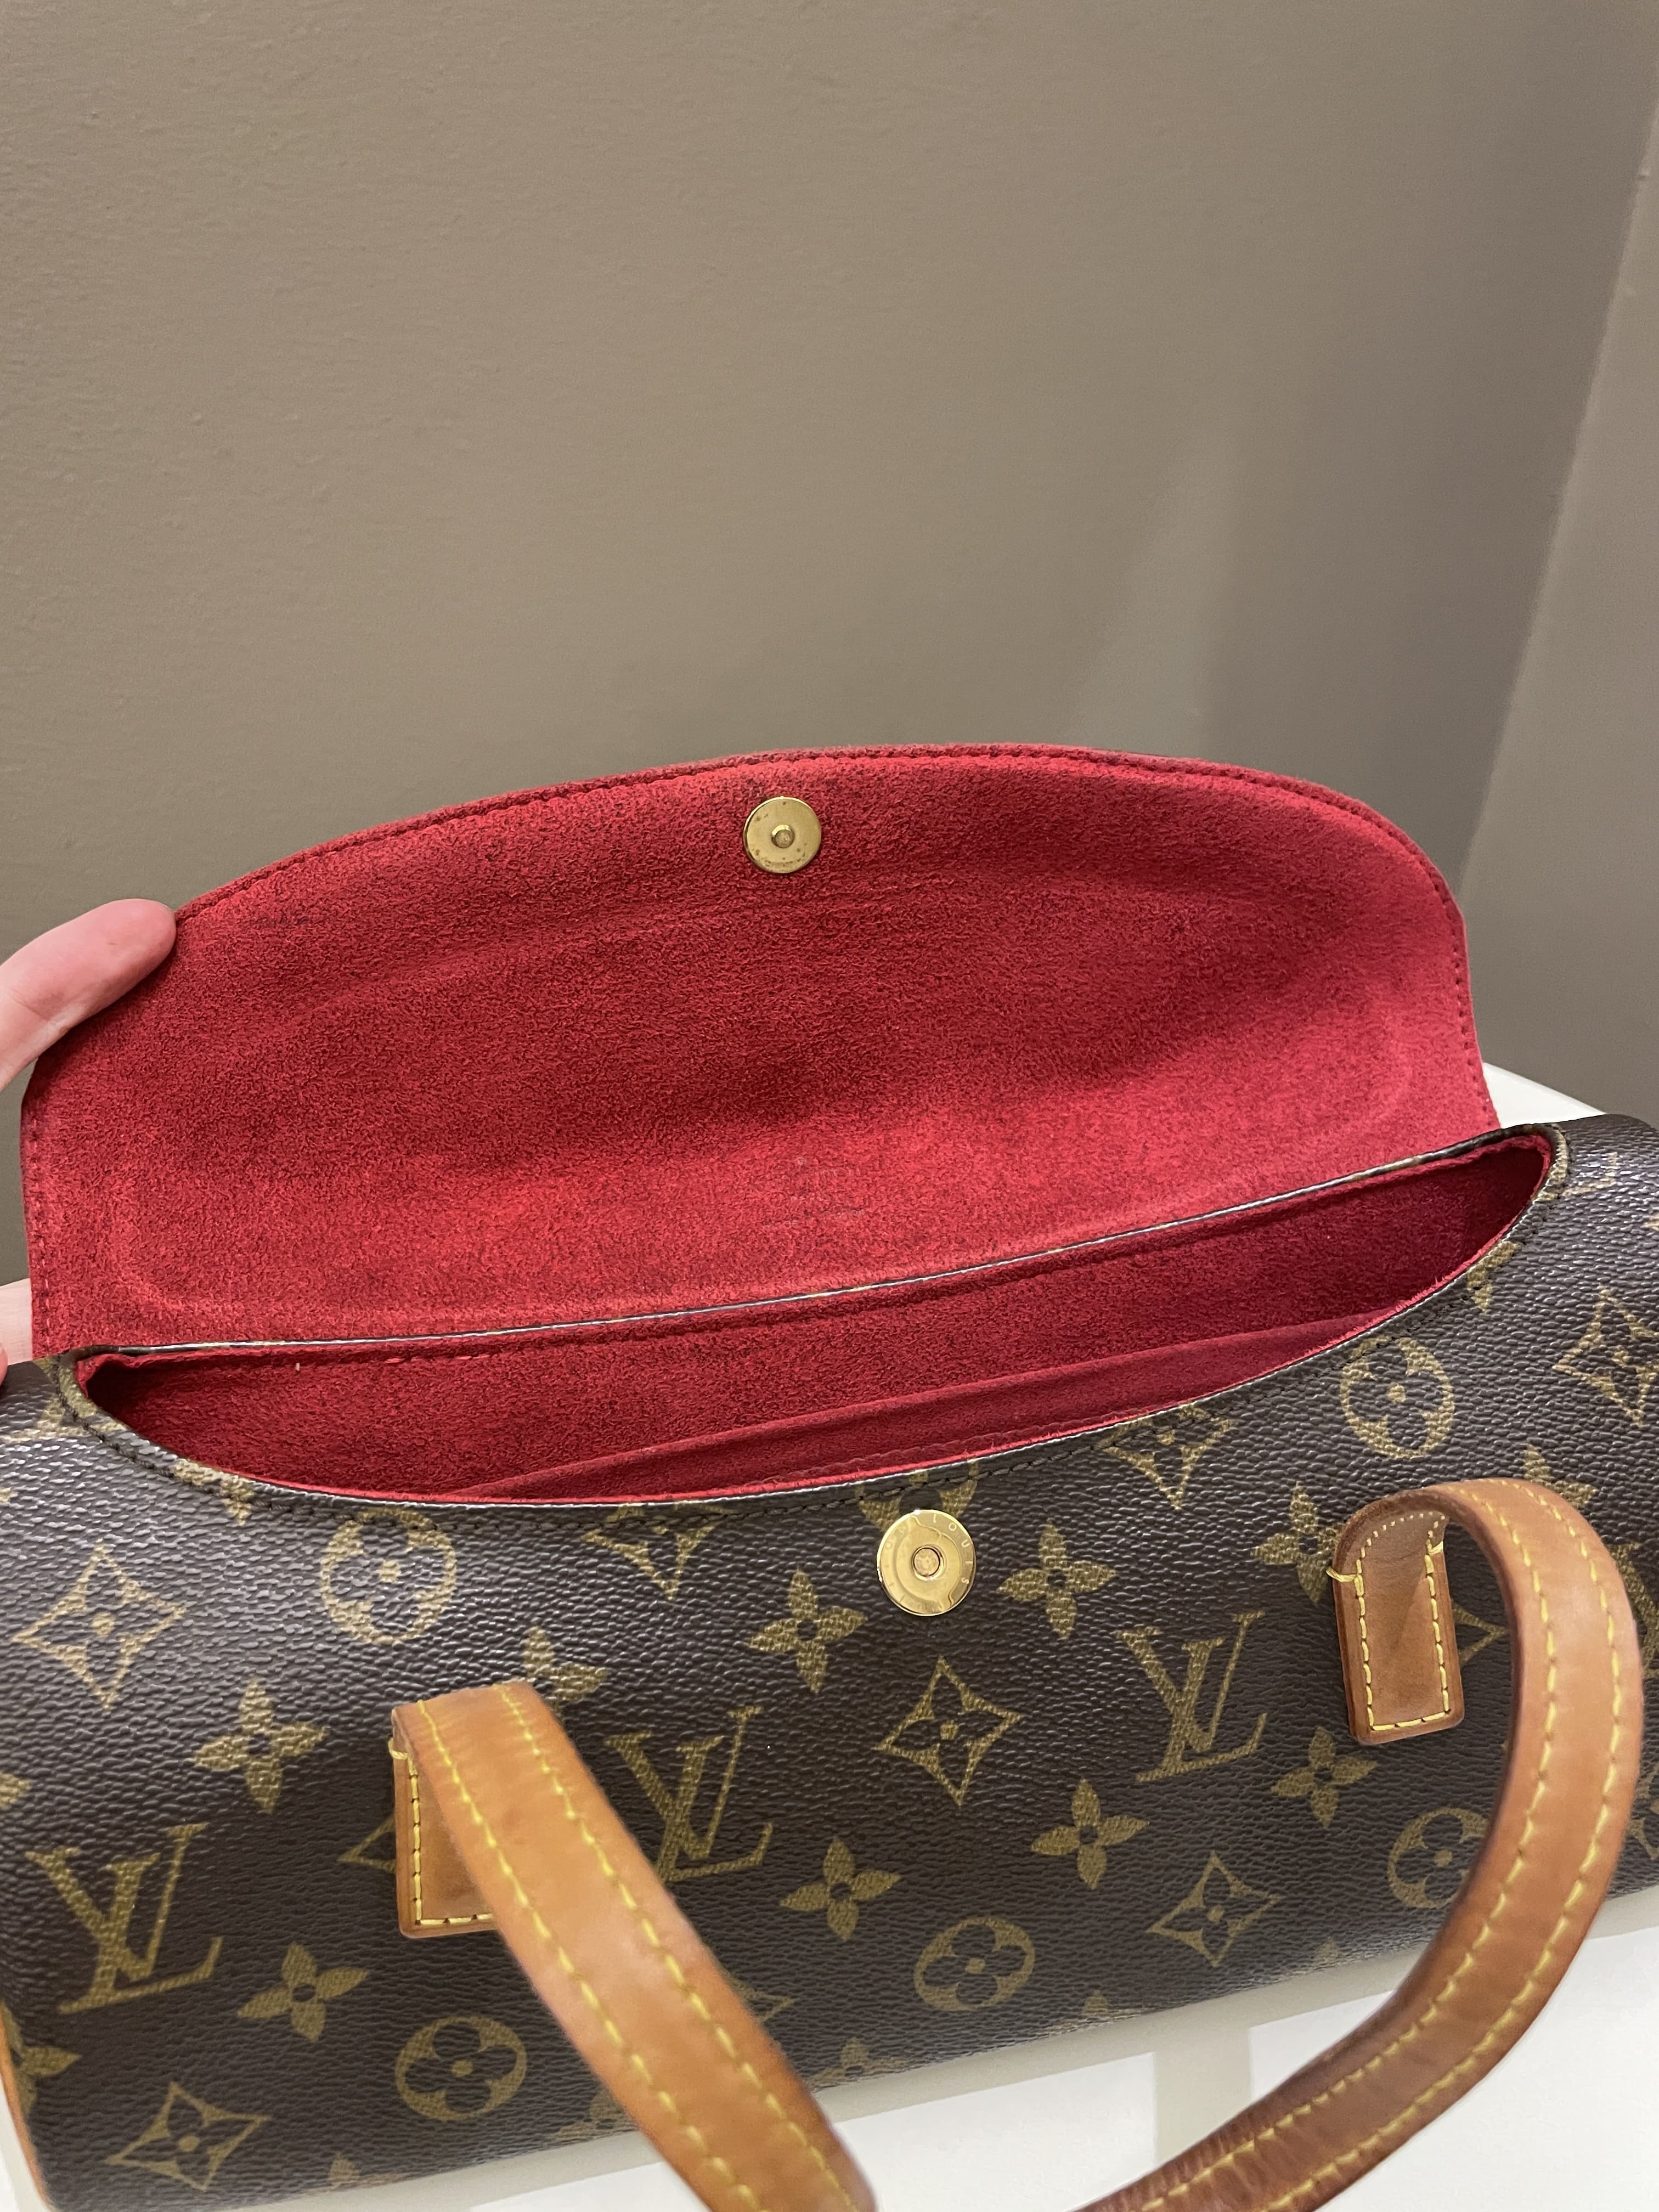 LOUIS VUITTON - 【新品未使用】ポルト クレ カレッジLVリード ドッグ キーリング 柴犬 ドッグの通販 by PETIT CAFE's  sho